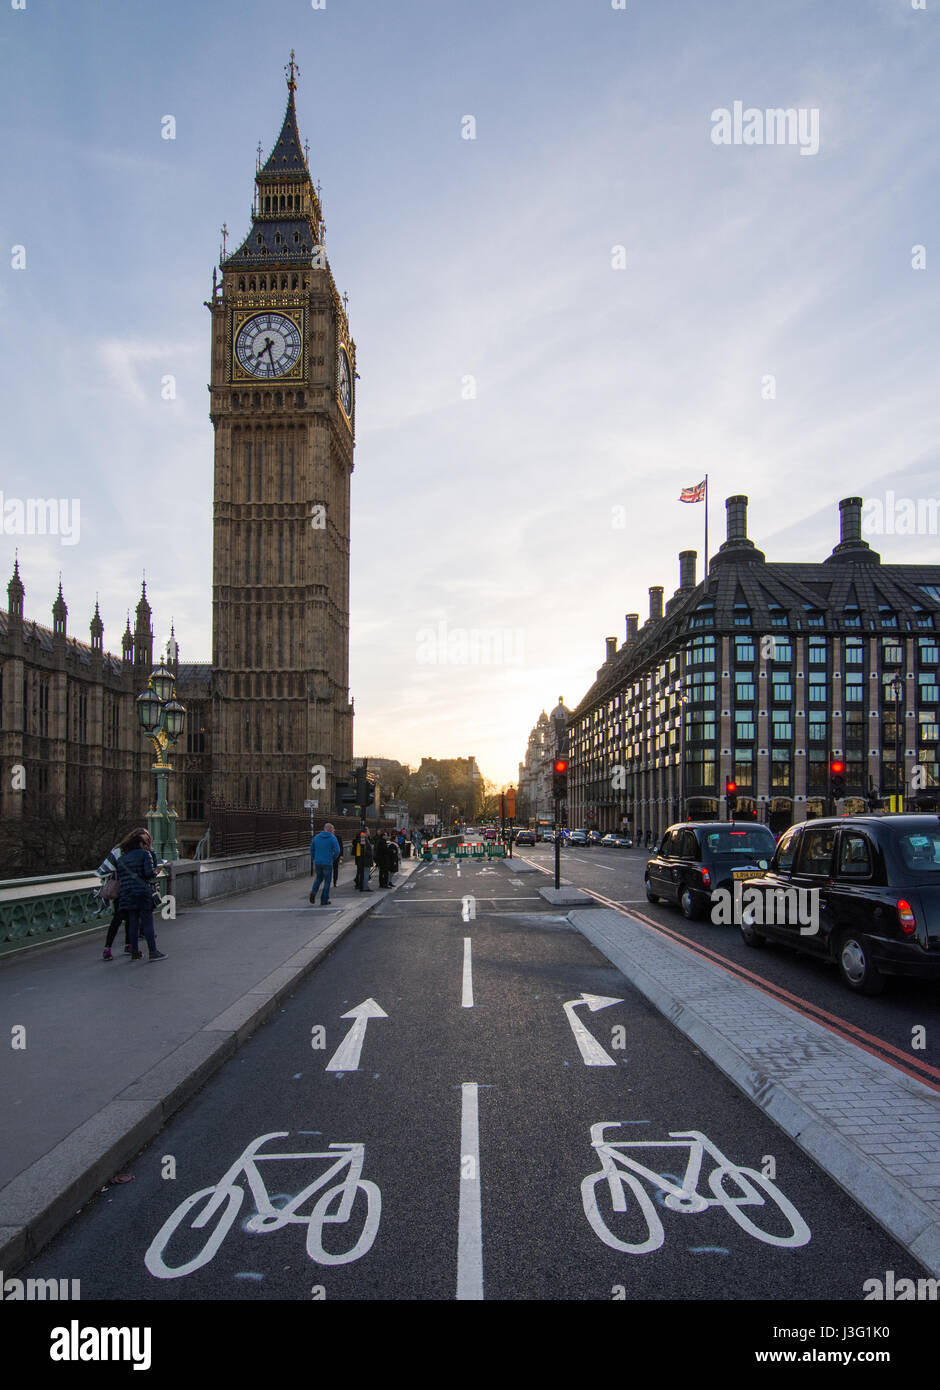 London, England - April 20, 2016: Freshly painted direction signs on the new East-West Cycle Superhighway outside the Houses of Parliament in central  Stock Photo